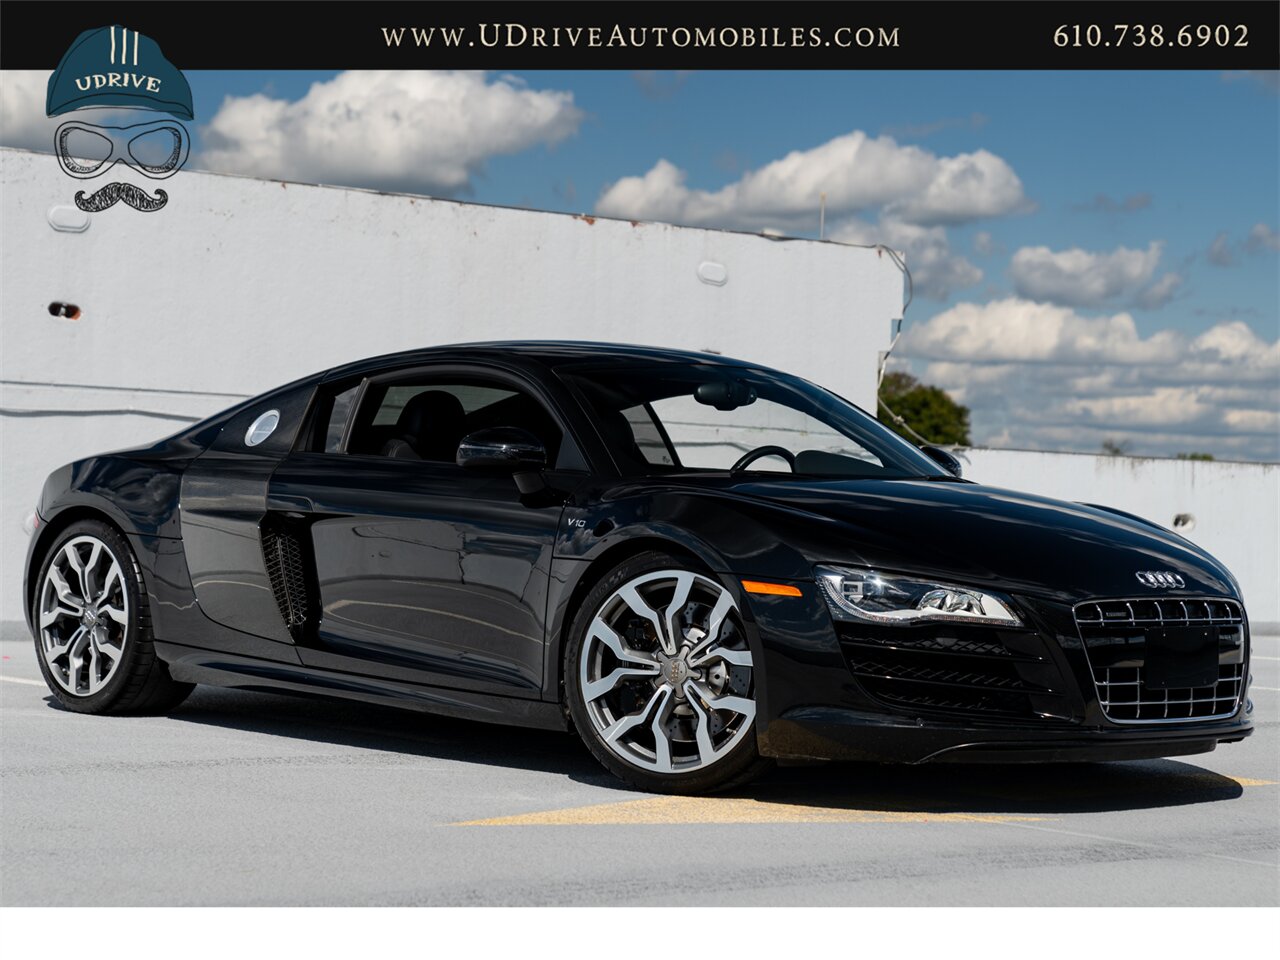 2011 Audi R8 5.2 Quattro  V10 6 Speed Manual - Photo 3 - West Chester, PA 19382